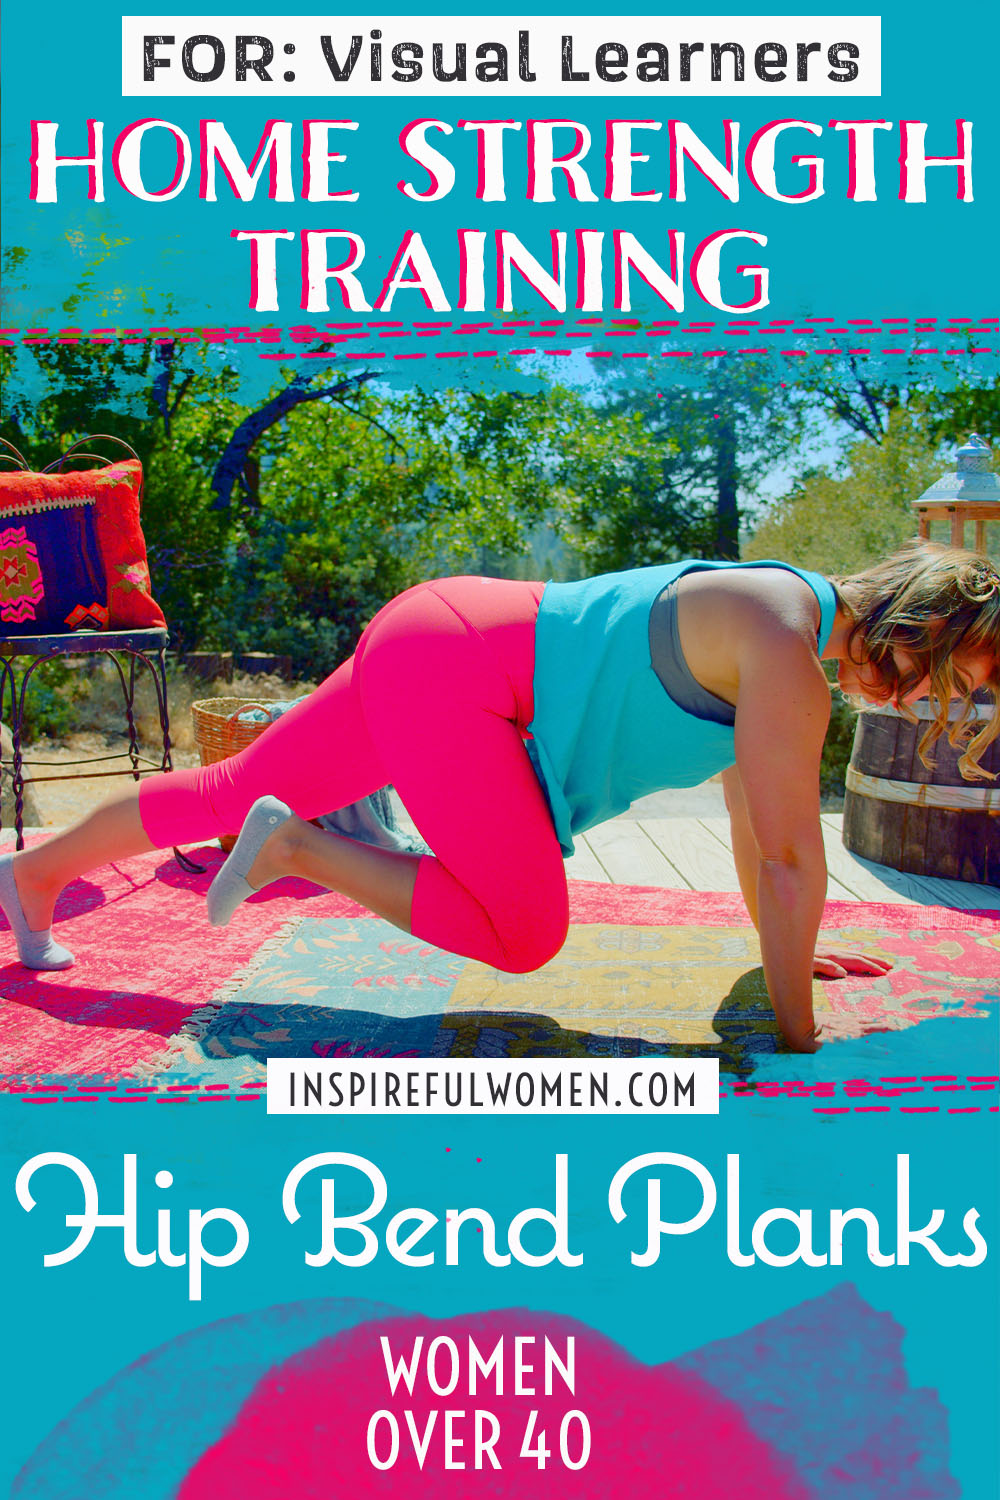 plank-alternating-hip-flexion-plank-variation-no-weight-ab-core-strength-exercise-women-40+